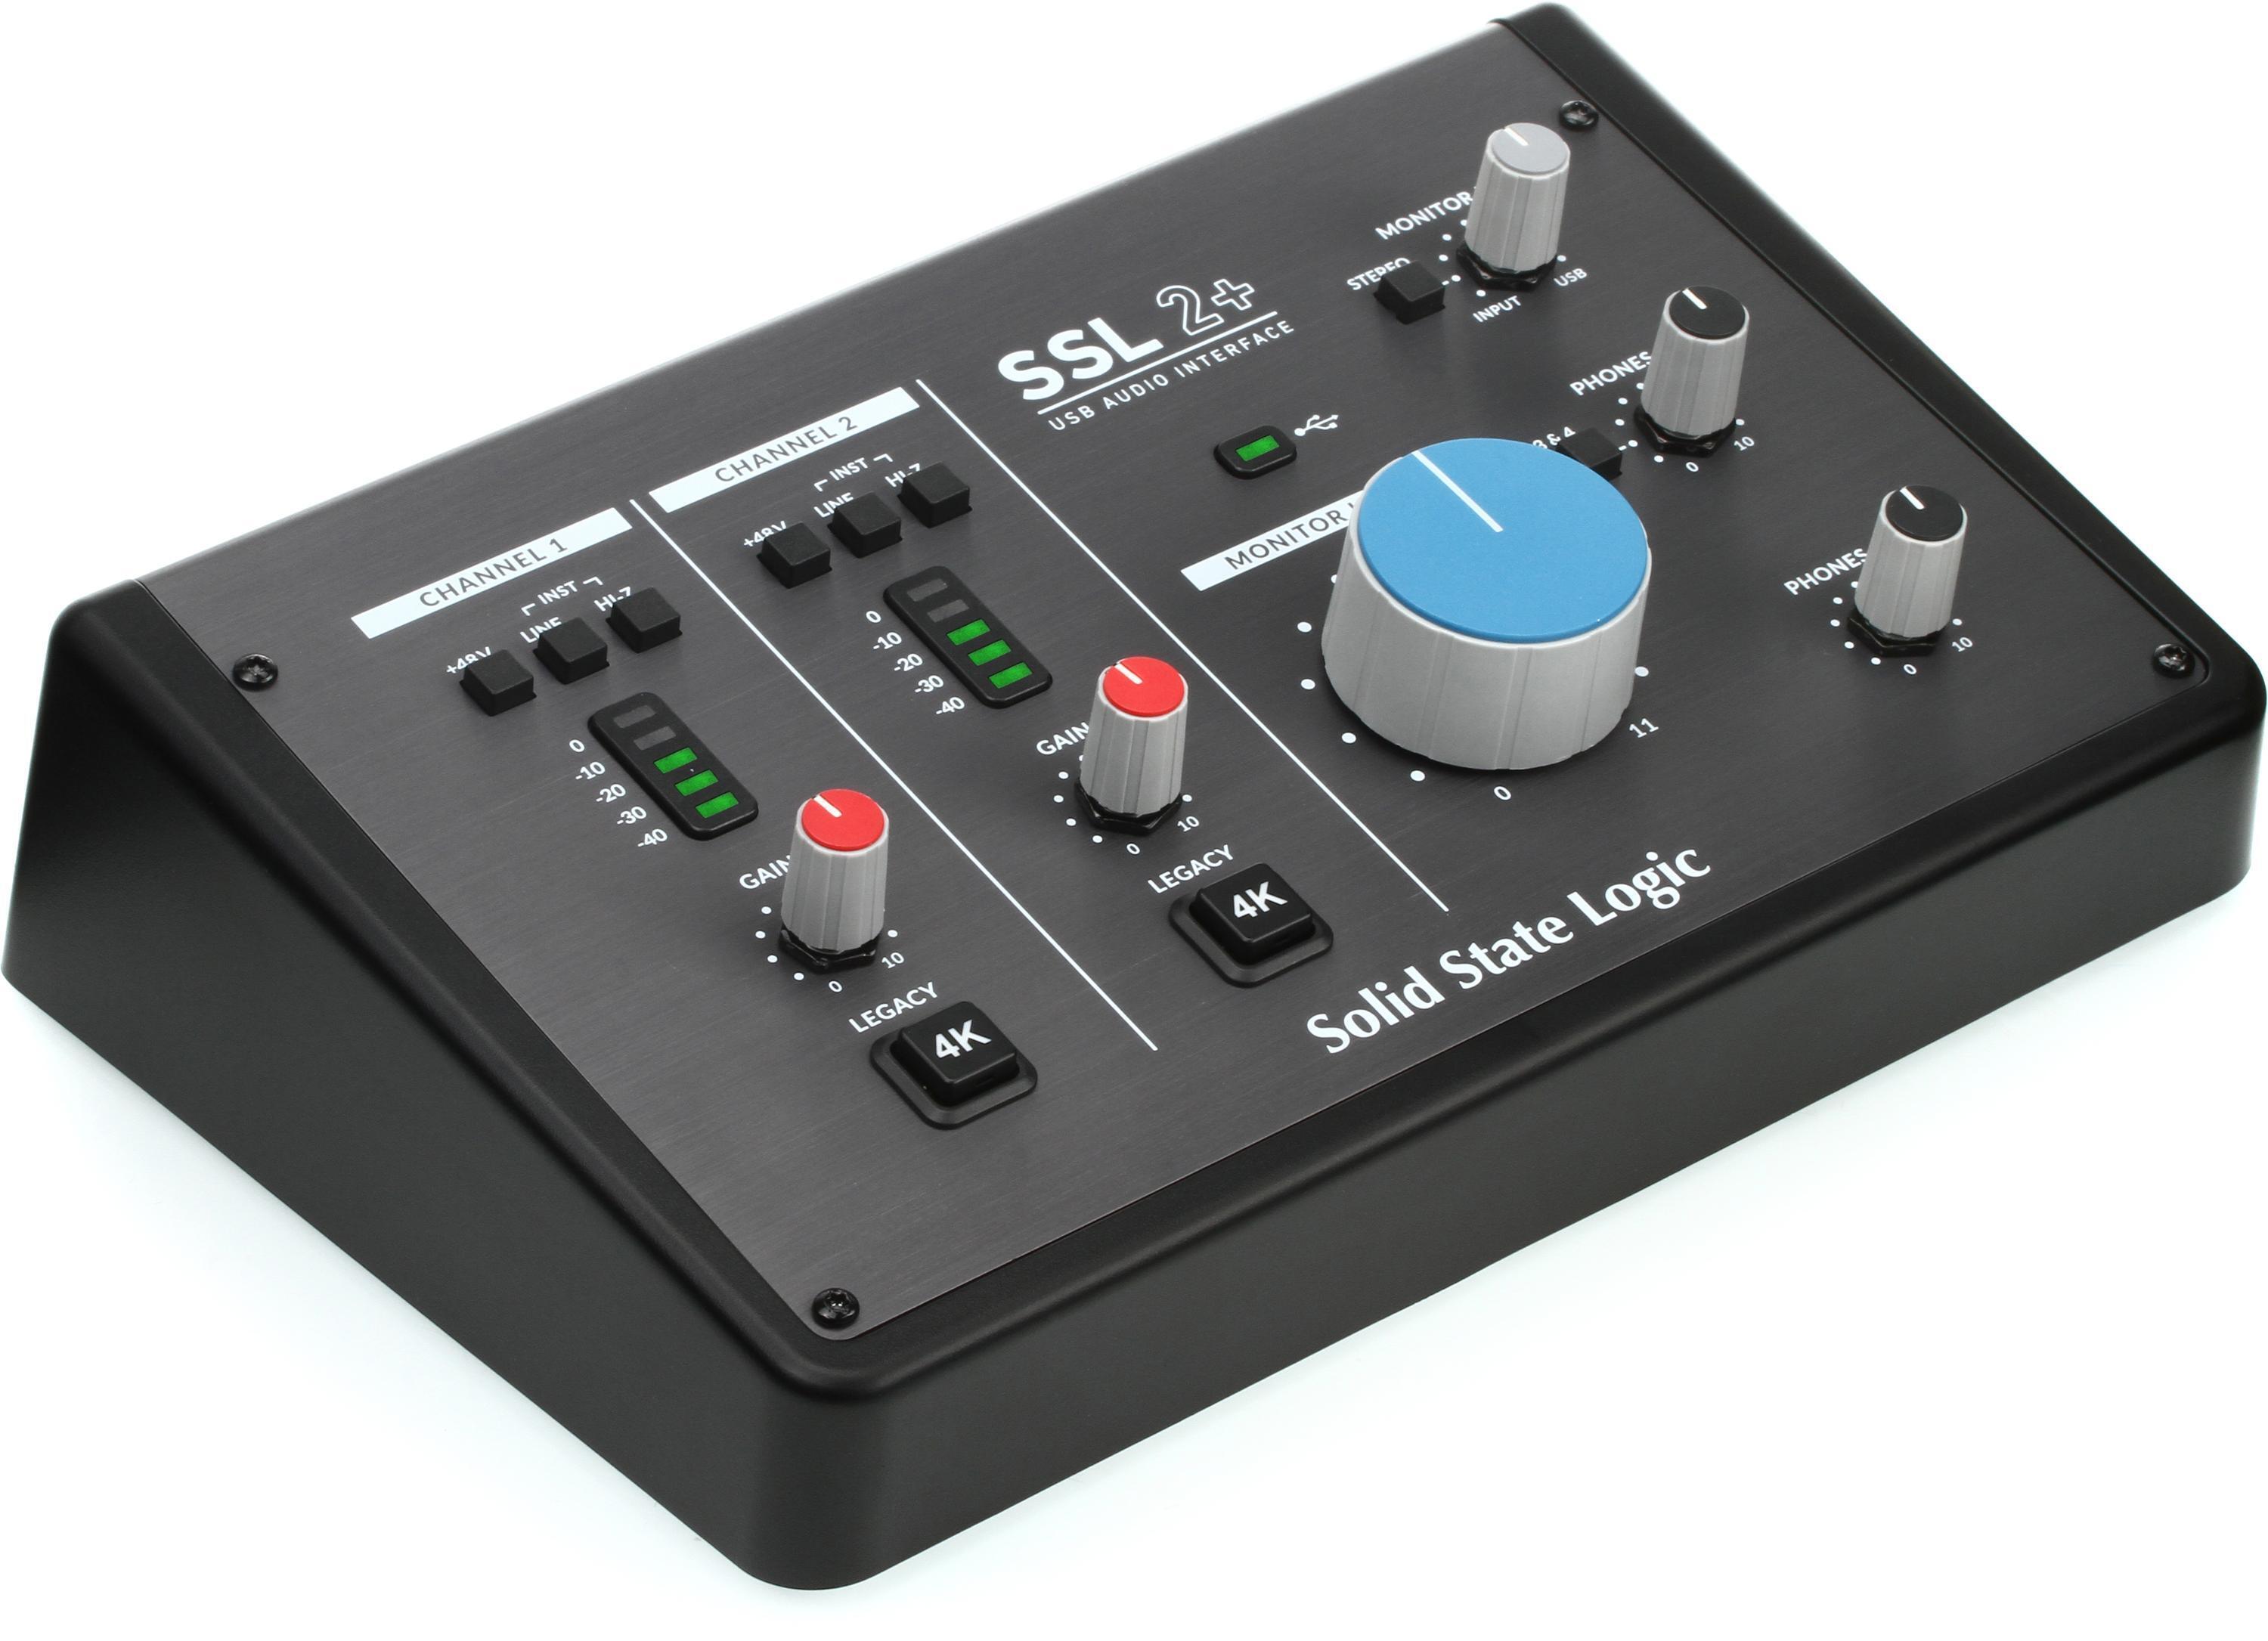 Solid State Logic SSL2+ USB Audio Interface | Sweetwater